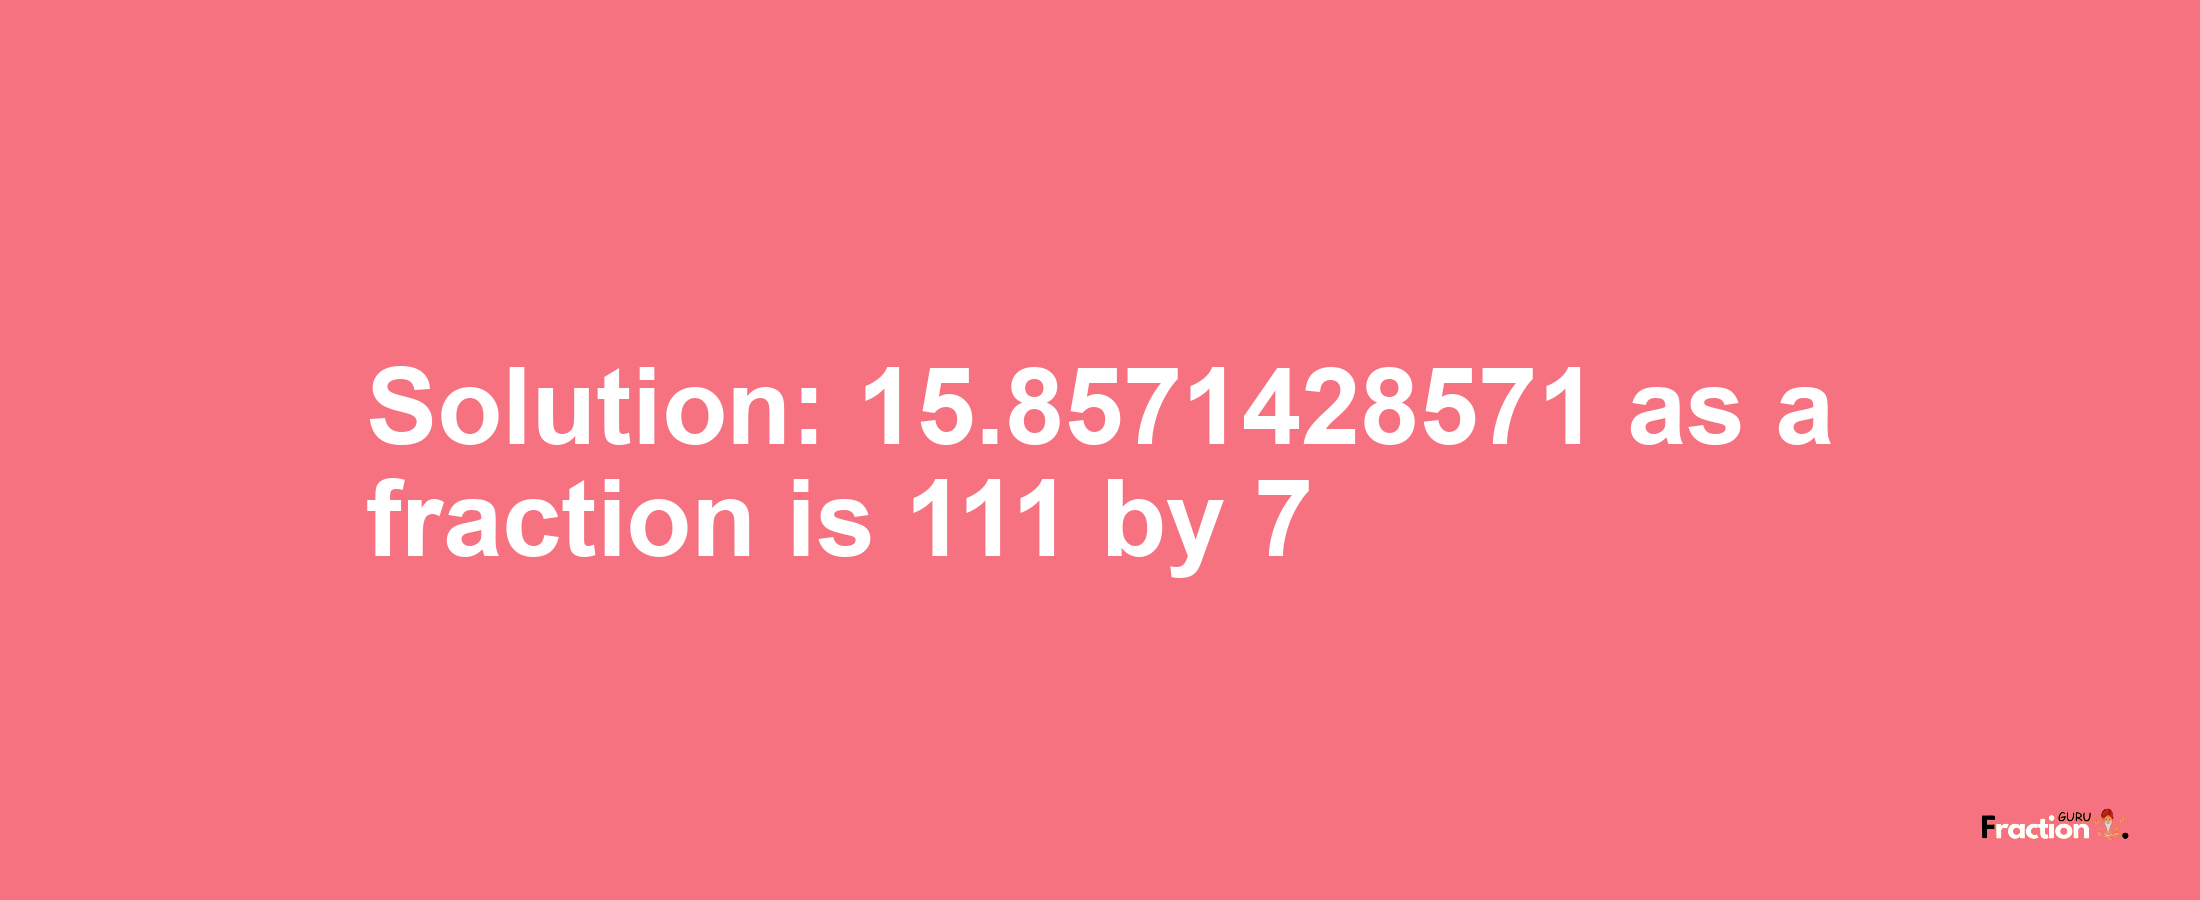 Solution:15.8571428571 as a fraction is 111/7